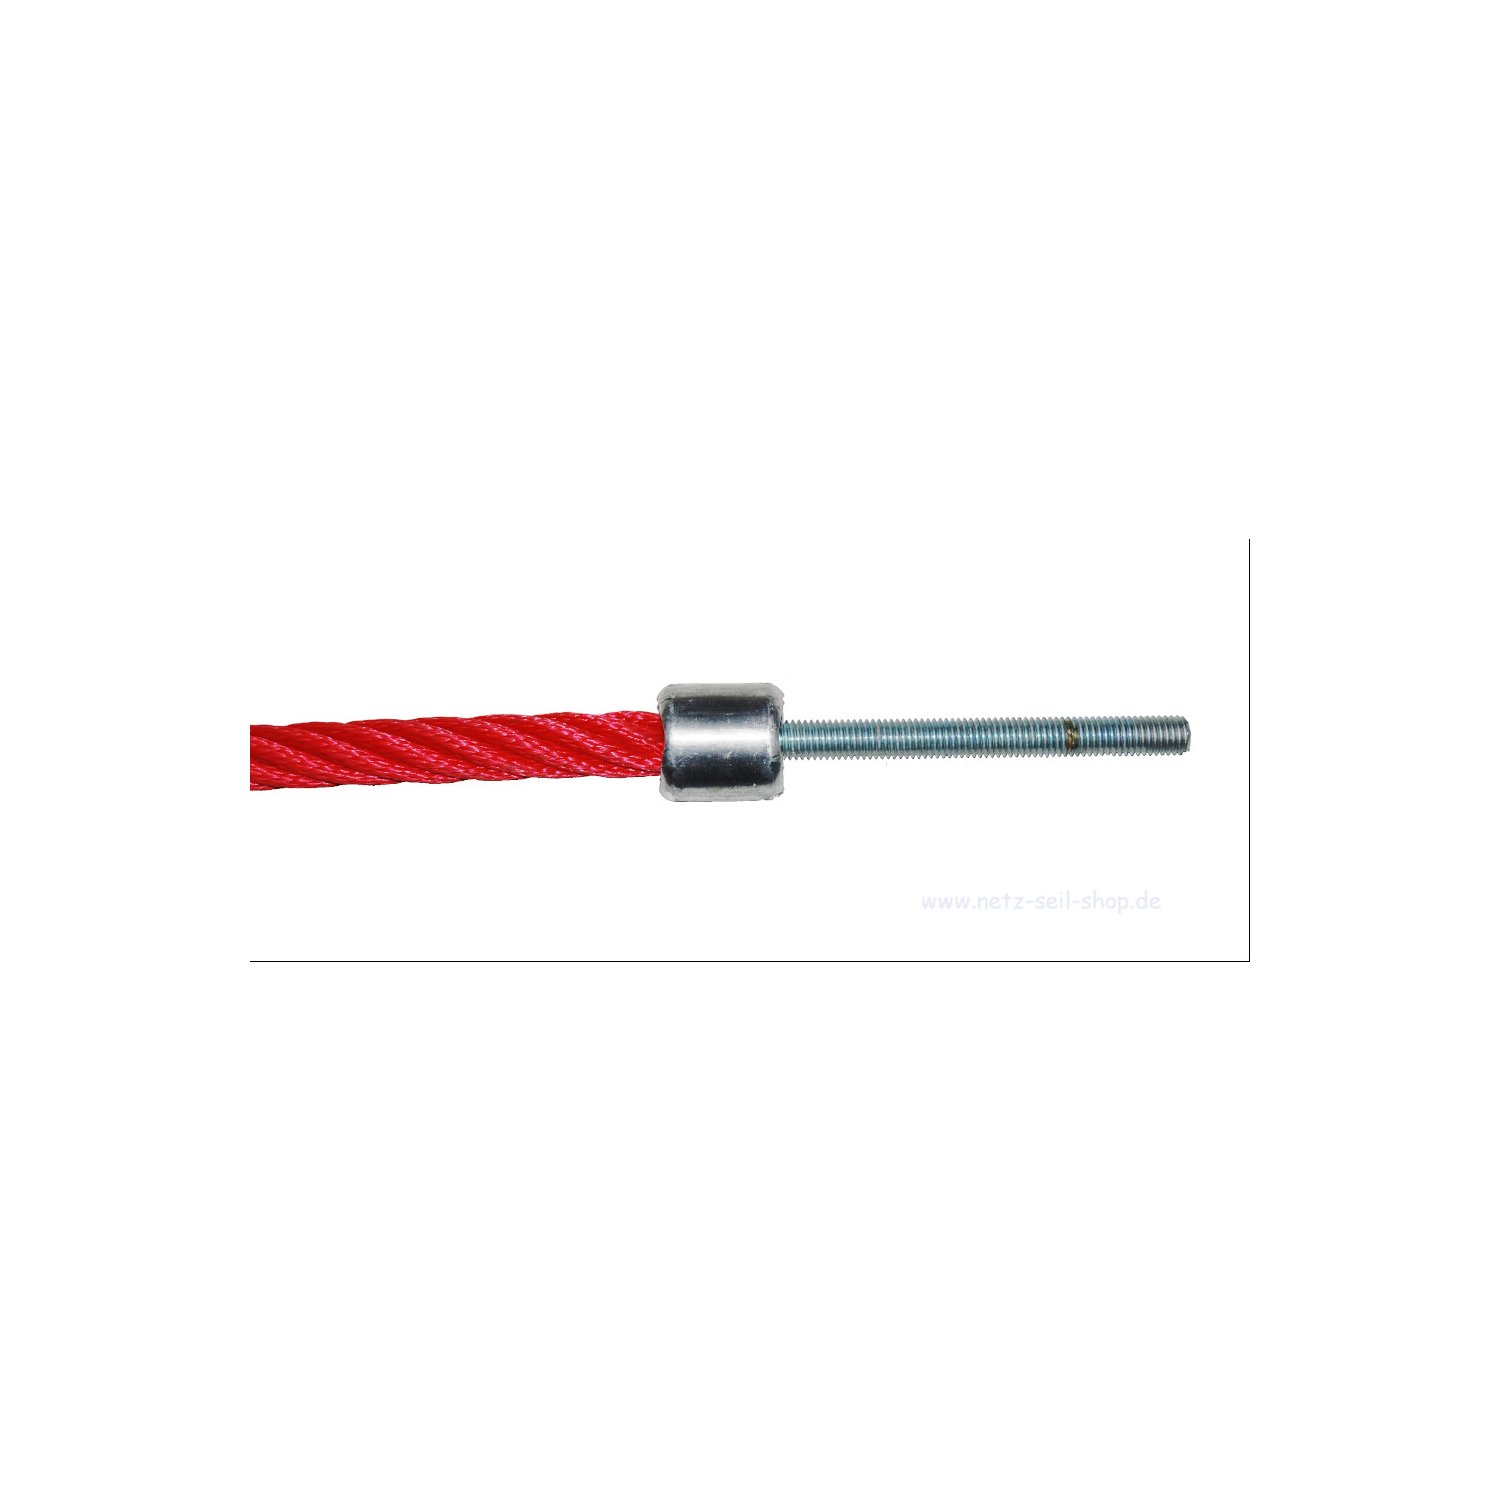 Stainless steel threaded bolt M12 x 160 mm, V2A, directly pressed [13,09 EUR]